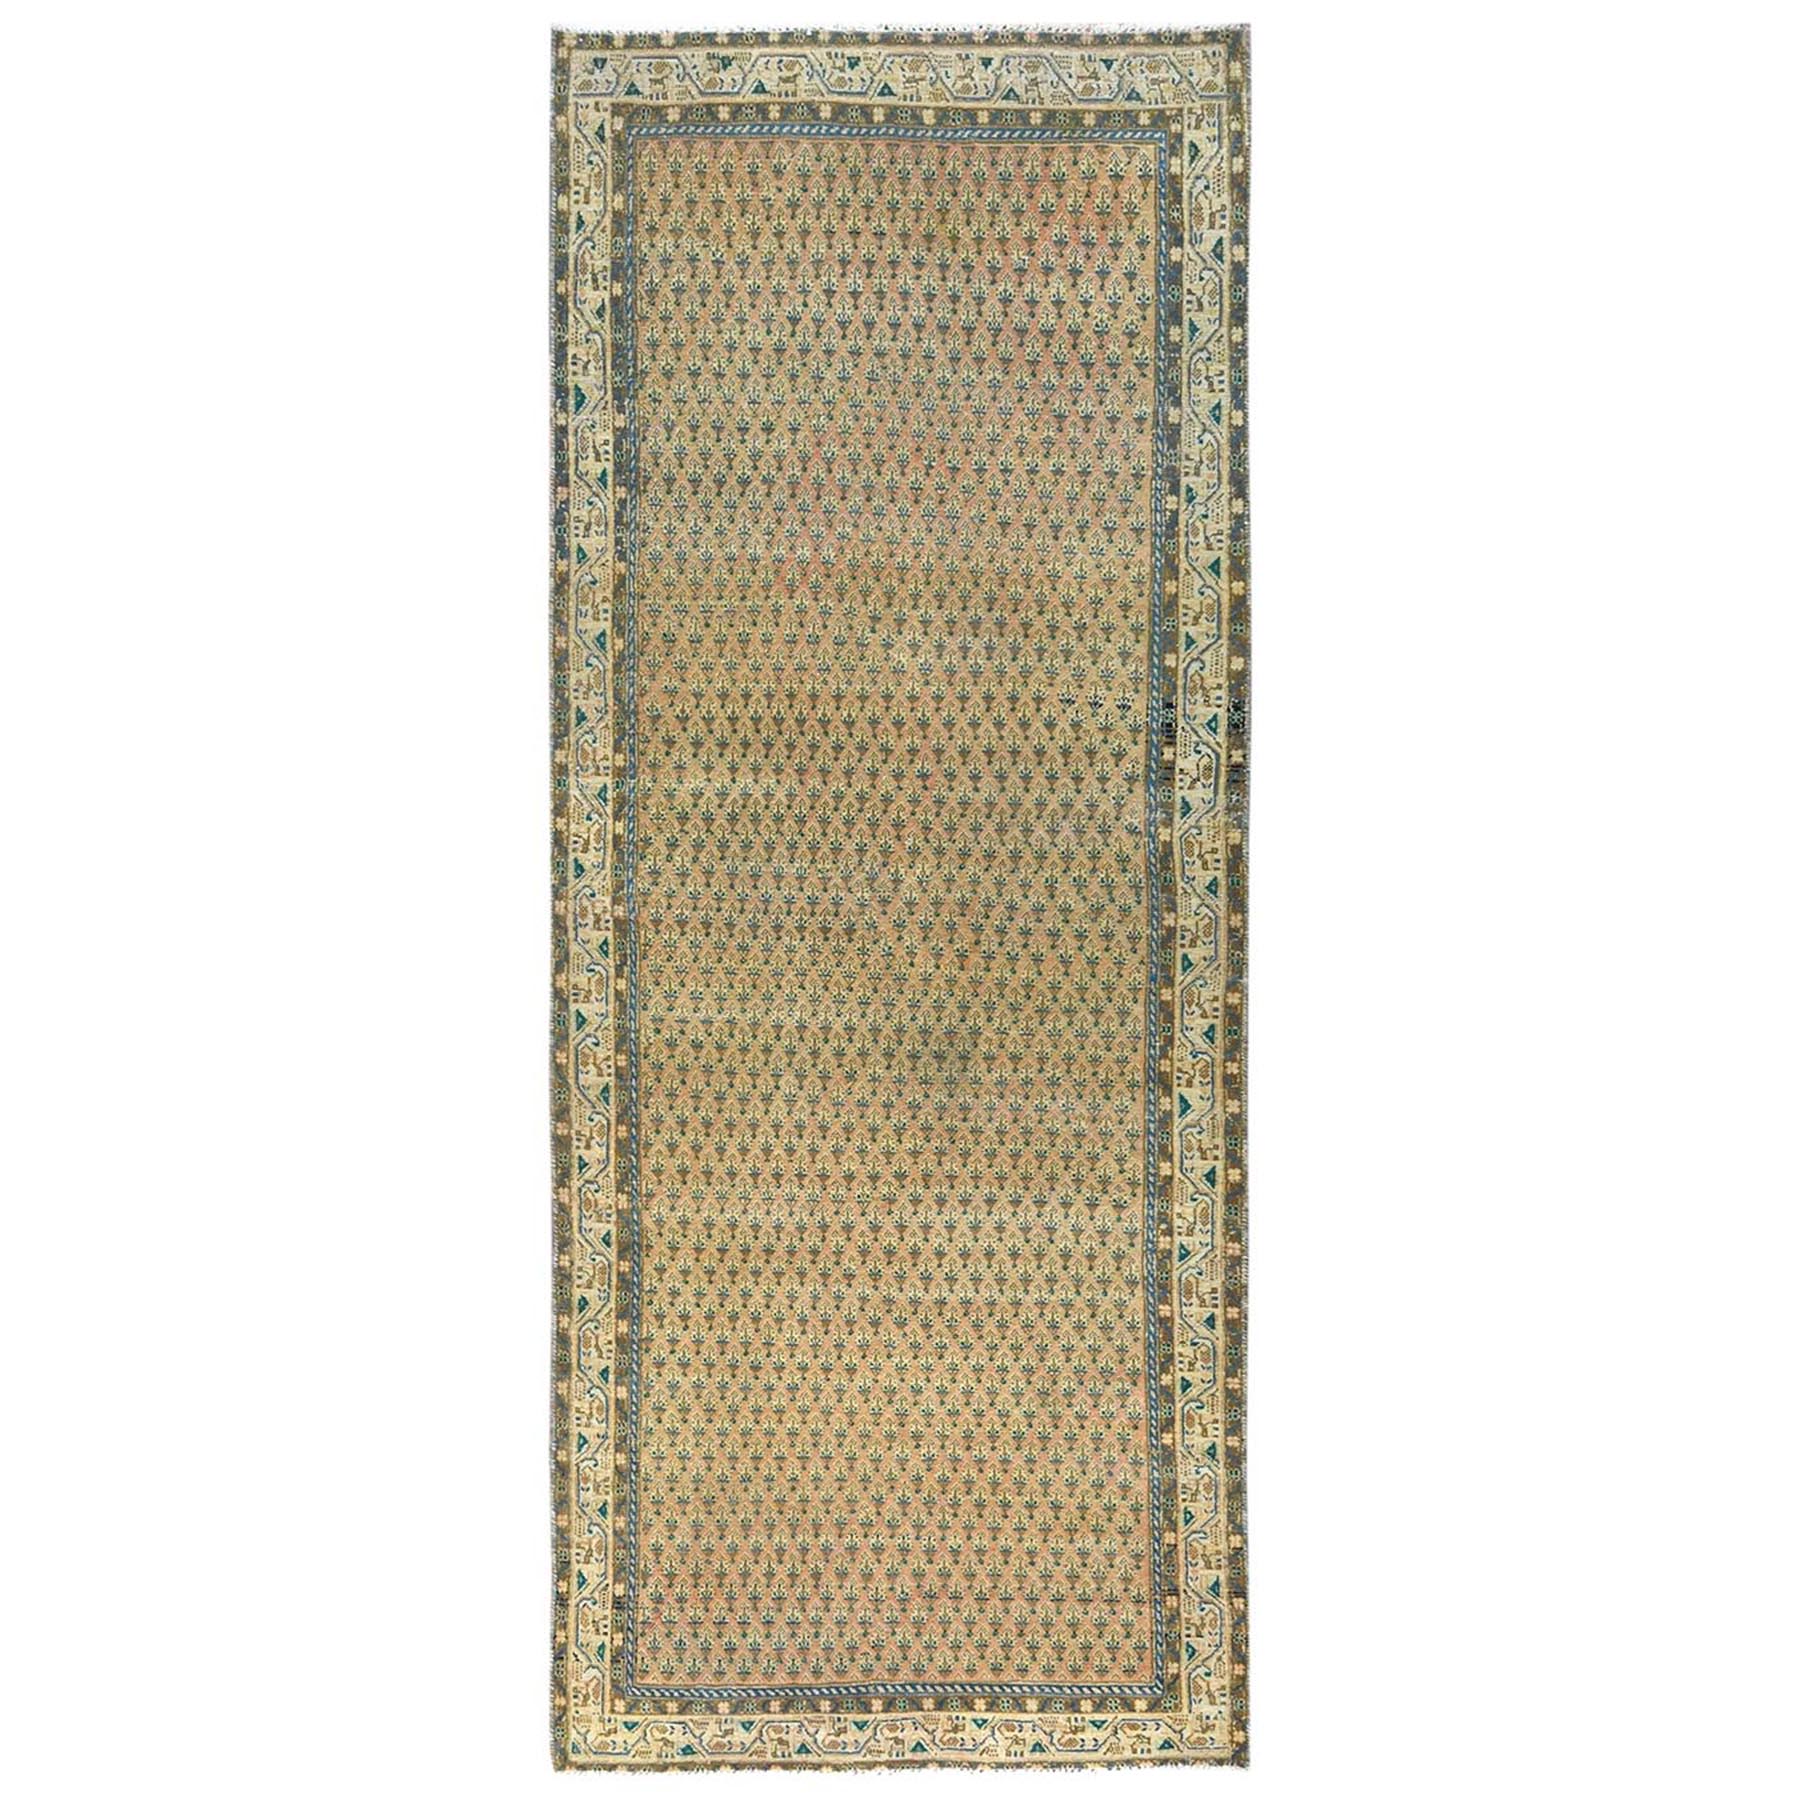 3'6"x9' Faded Peach, Hand Woven Vintage Persian Seraband with Small Repetitive All Over Boteh Design, Pure Wool, Distressed Look, Sheared Low Wide Runner Oriental Rug 